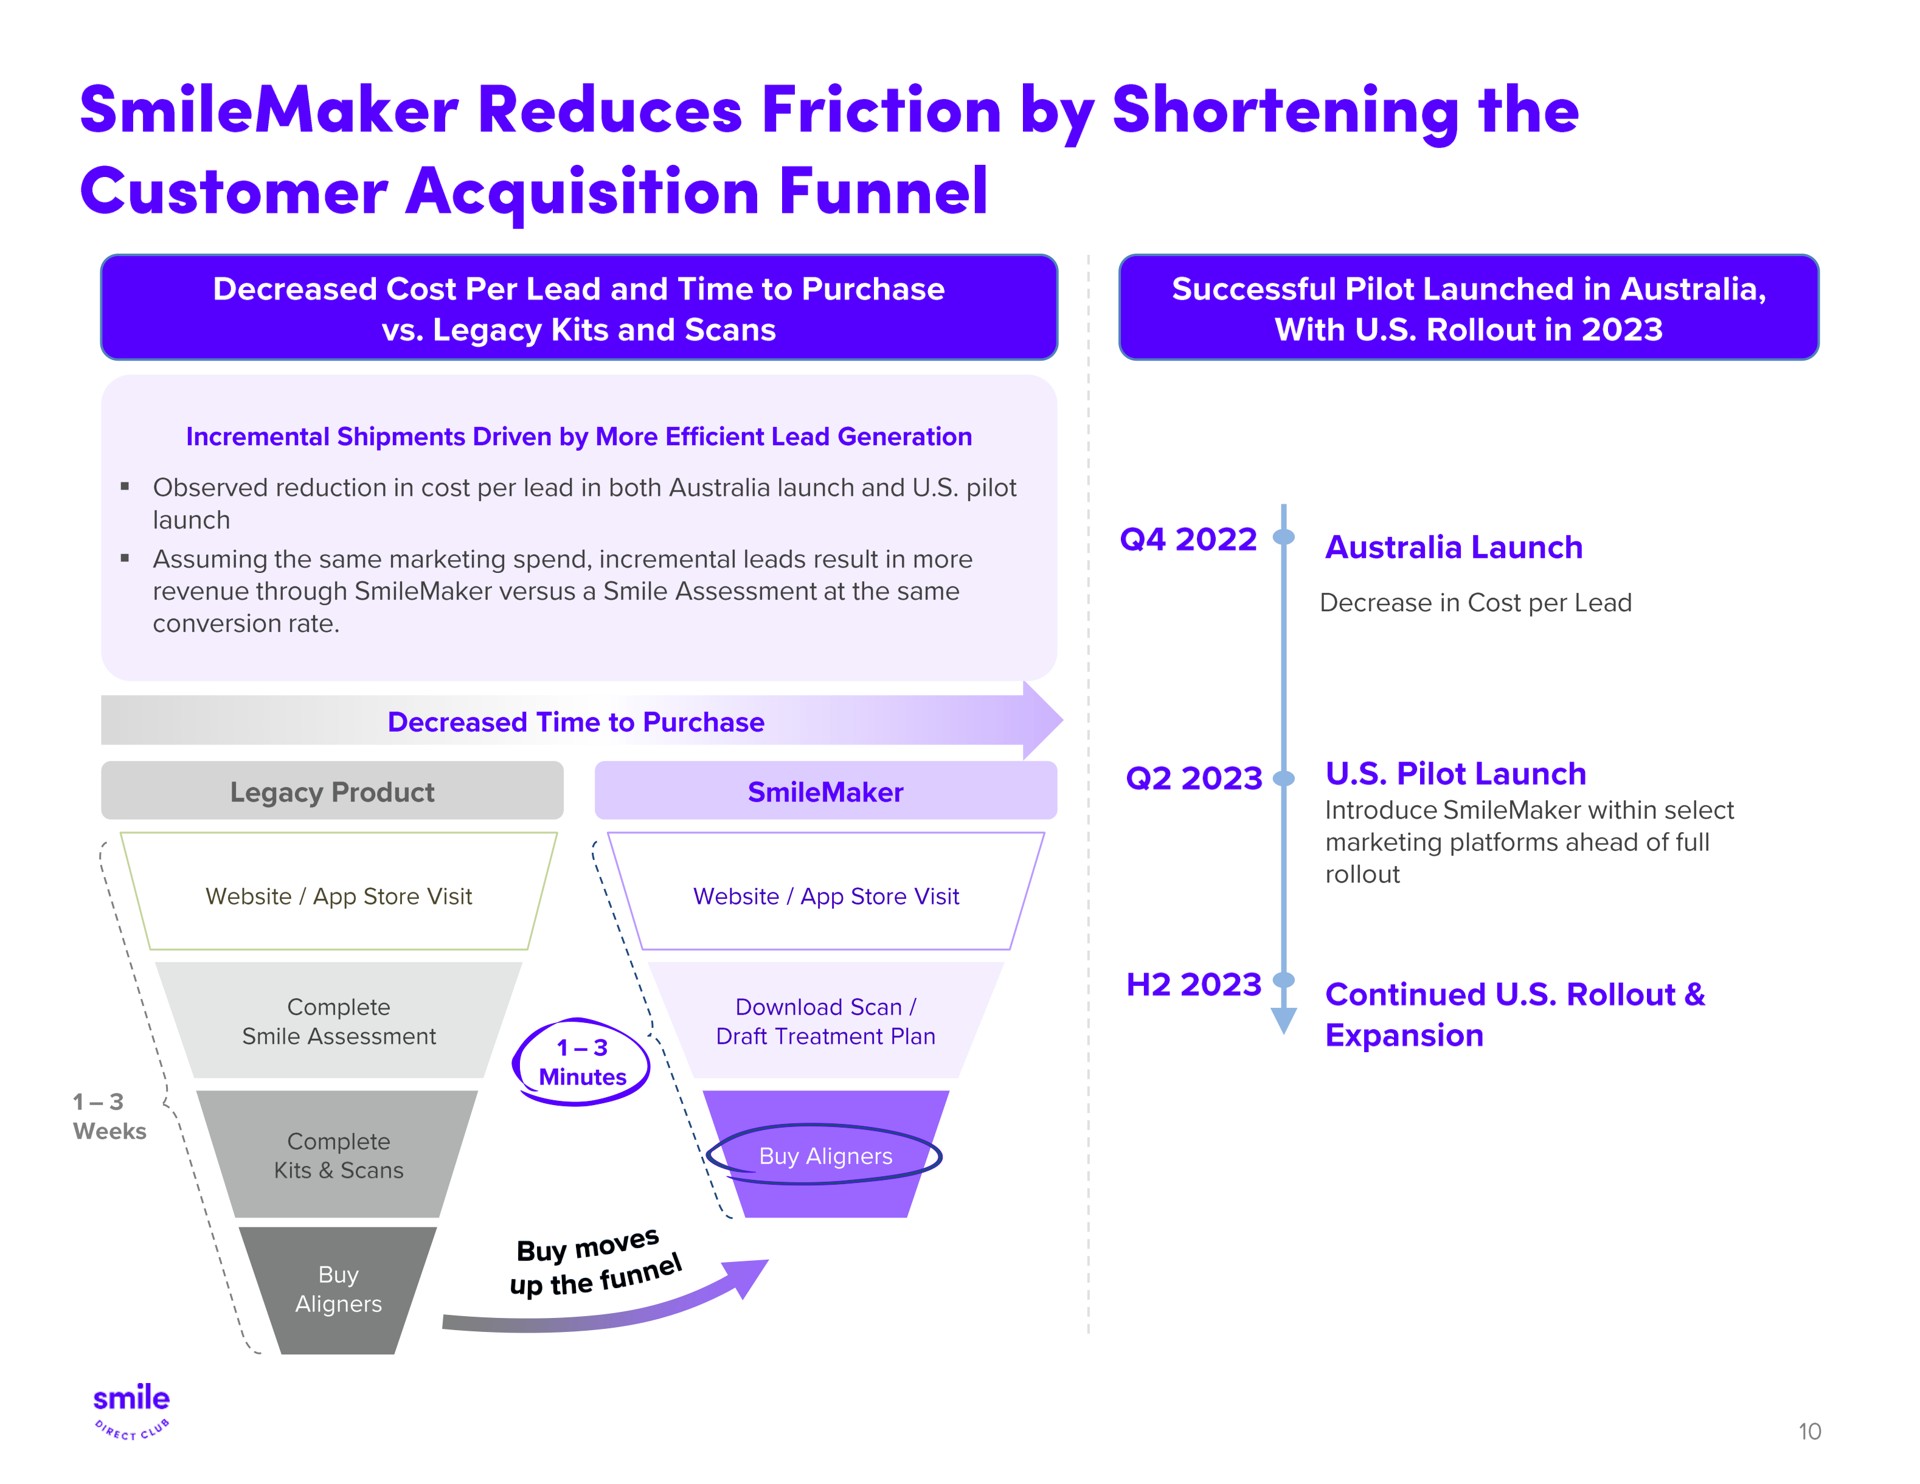 smilemaker reduces friction by shortening the customer acquisition funnel | SmileDirectClub